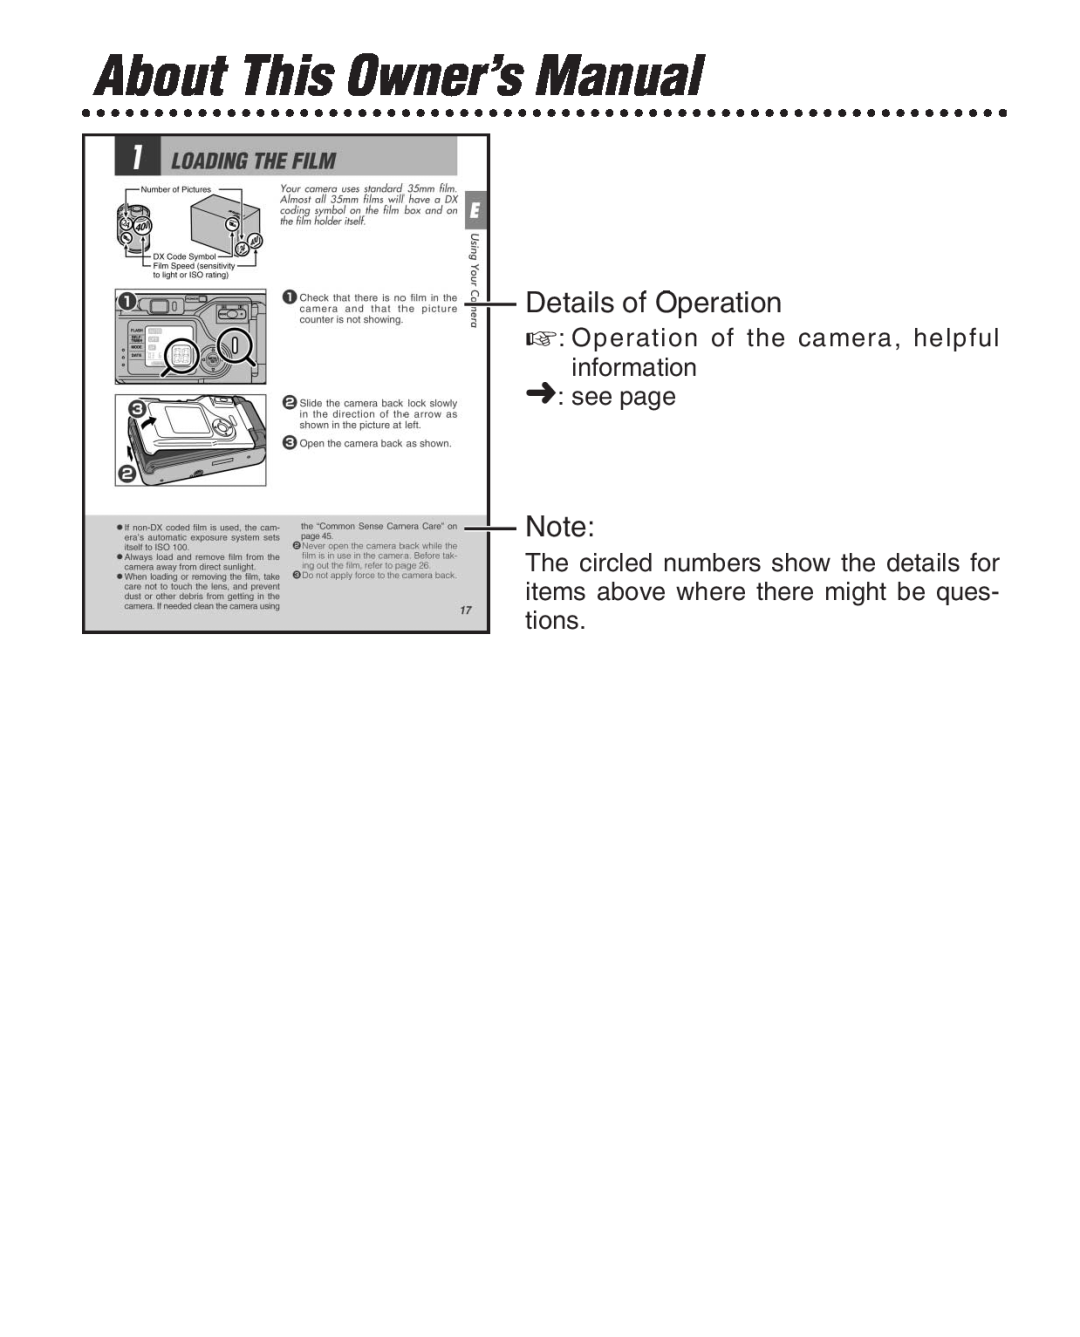 FujiFilm Zoom Date 160ez owner manual About This Owner’s Manual, Details of Operation 